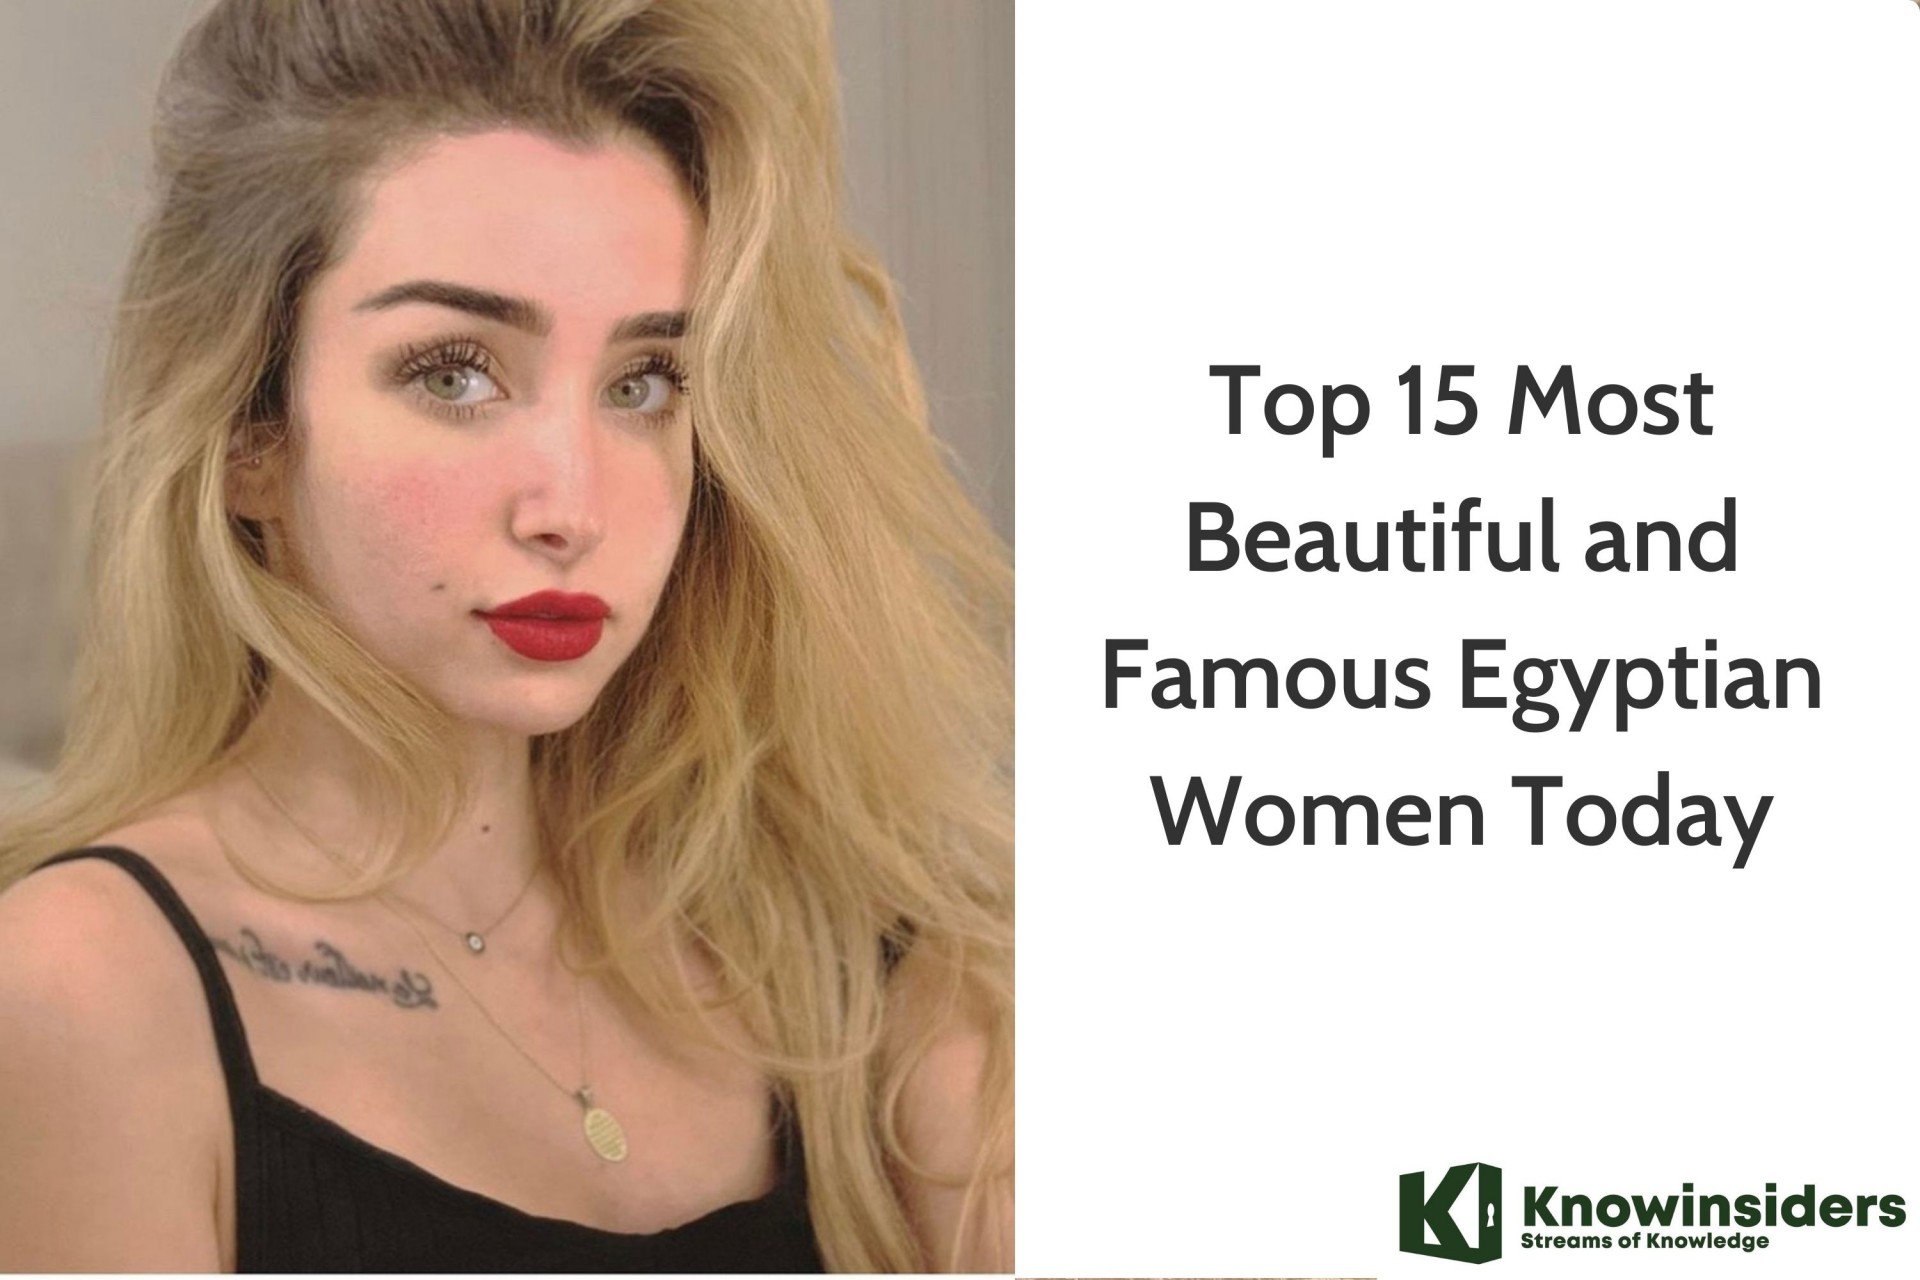 Top 15 Most Beautiful and Famous Egyptian Women Today